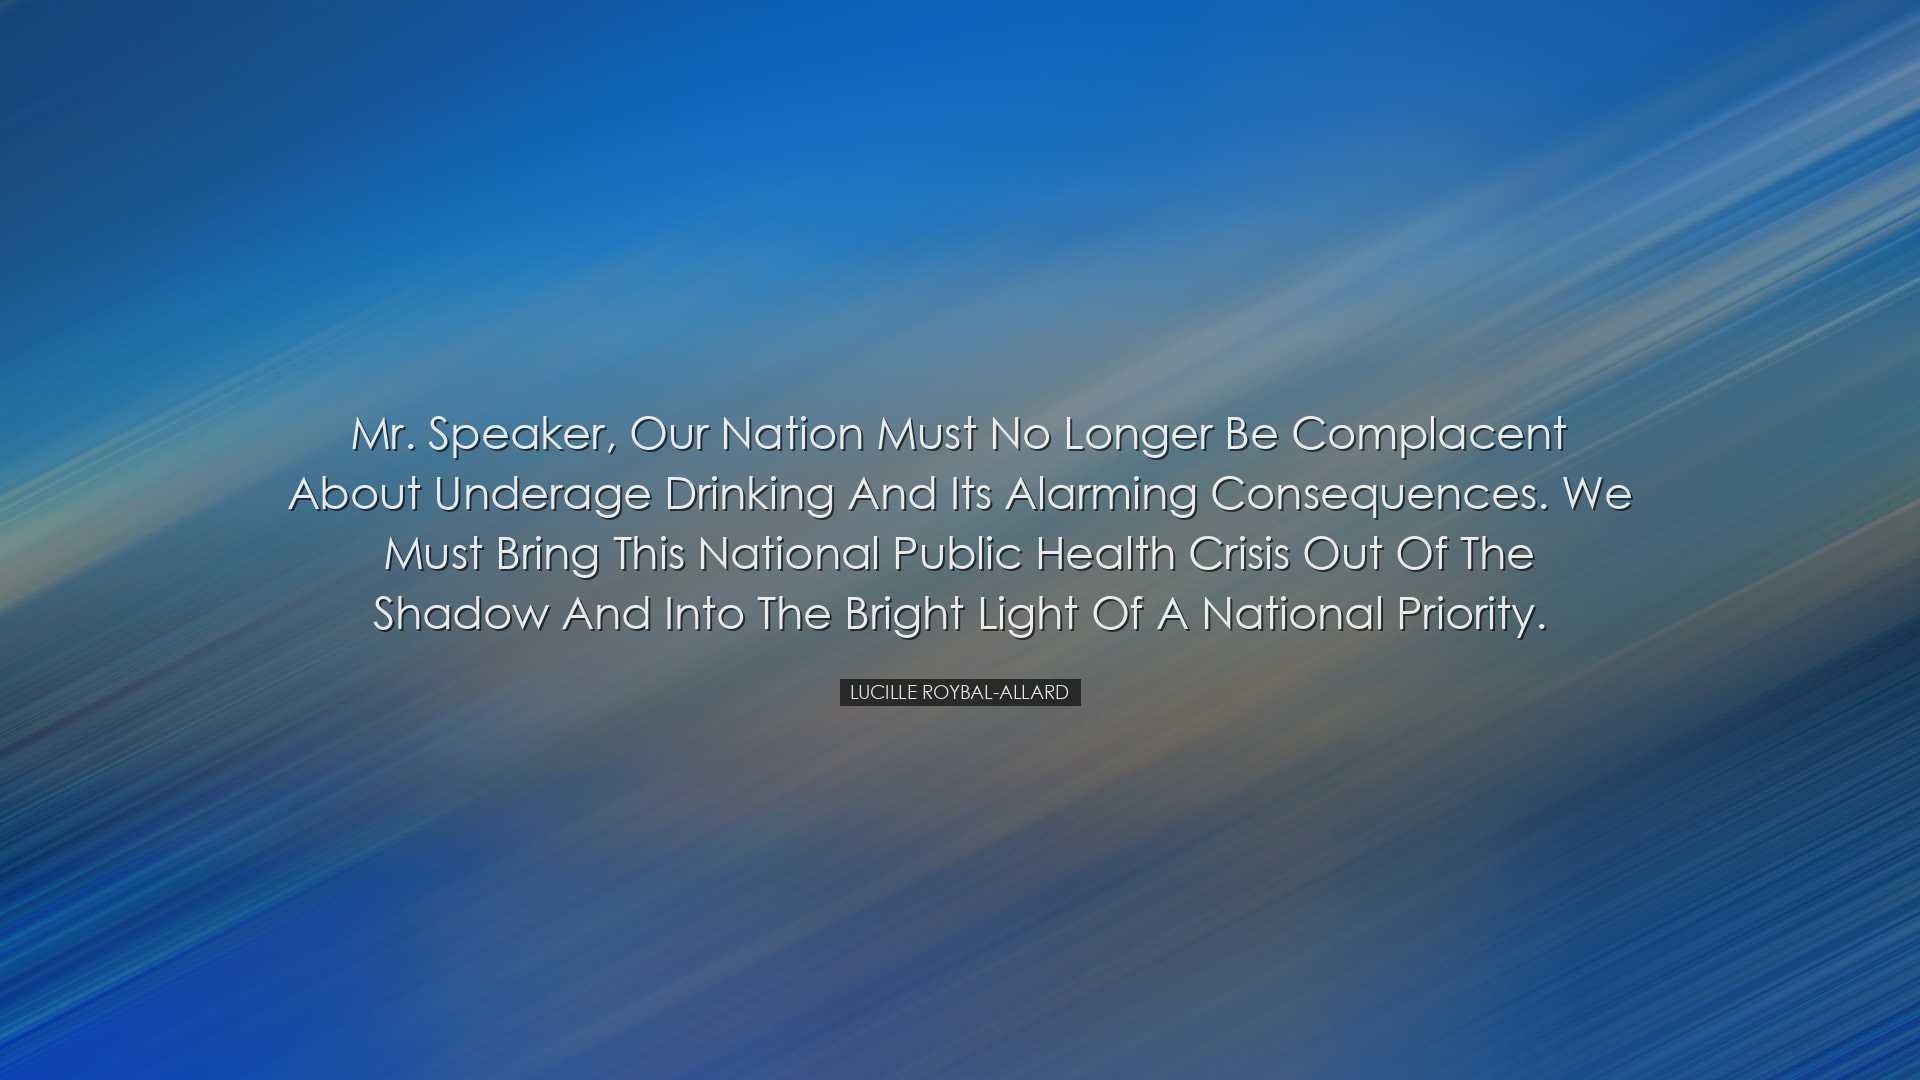 Mr. Speaker, our Nation must no longer be complacent about underag